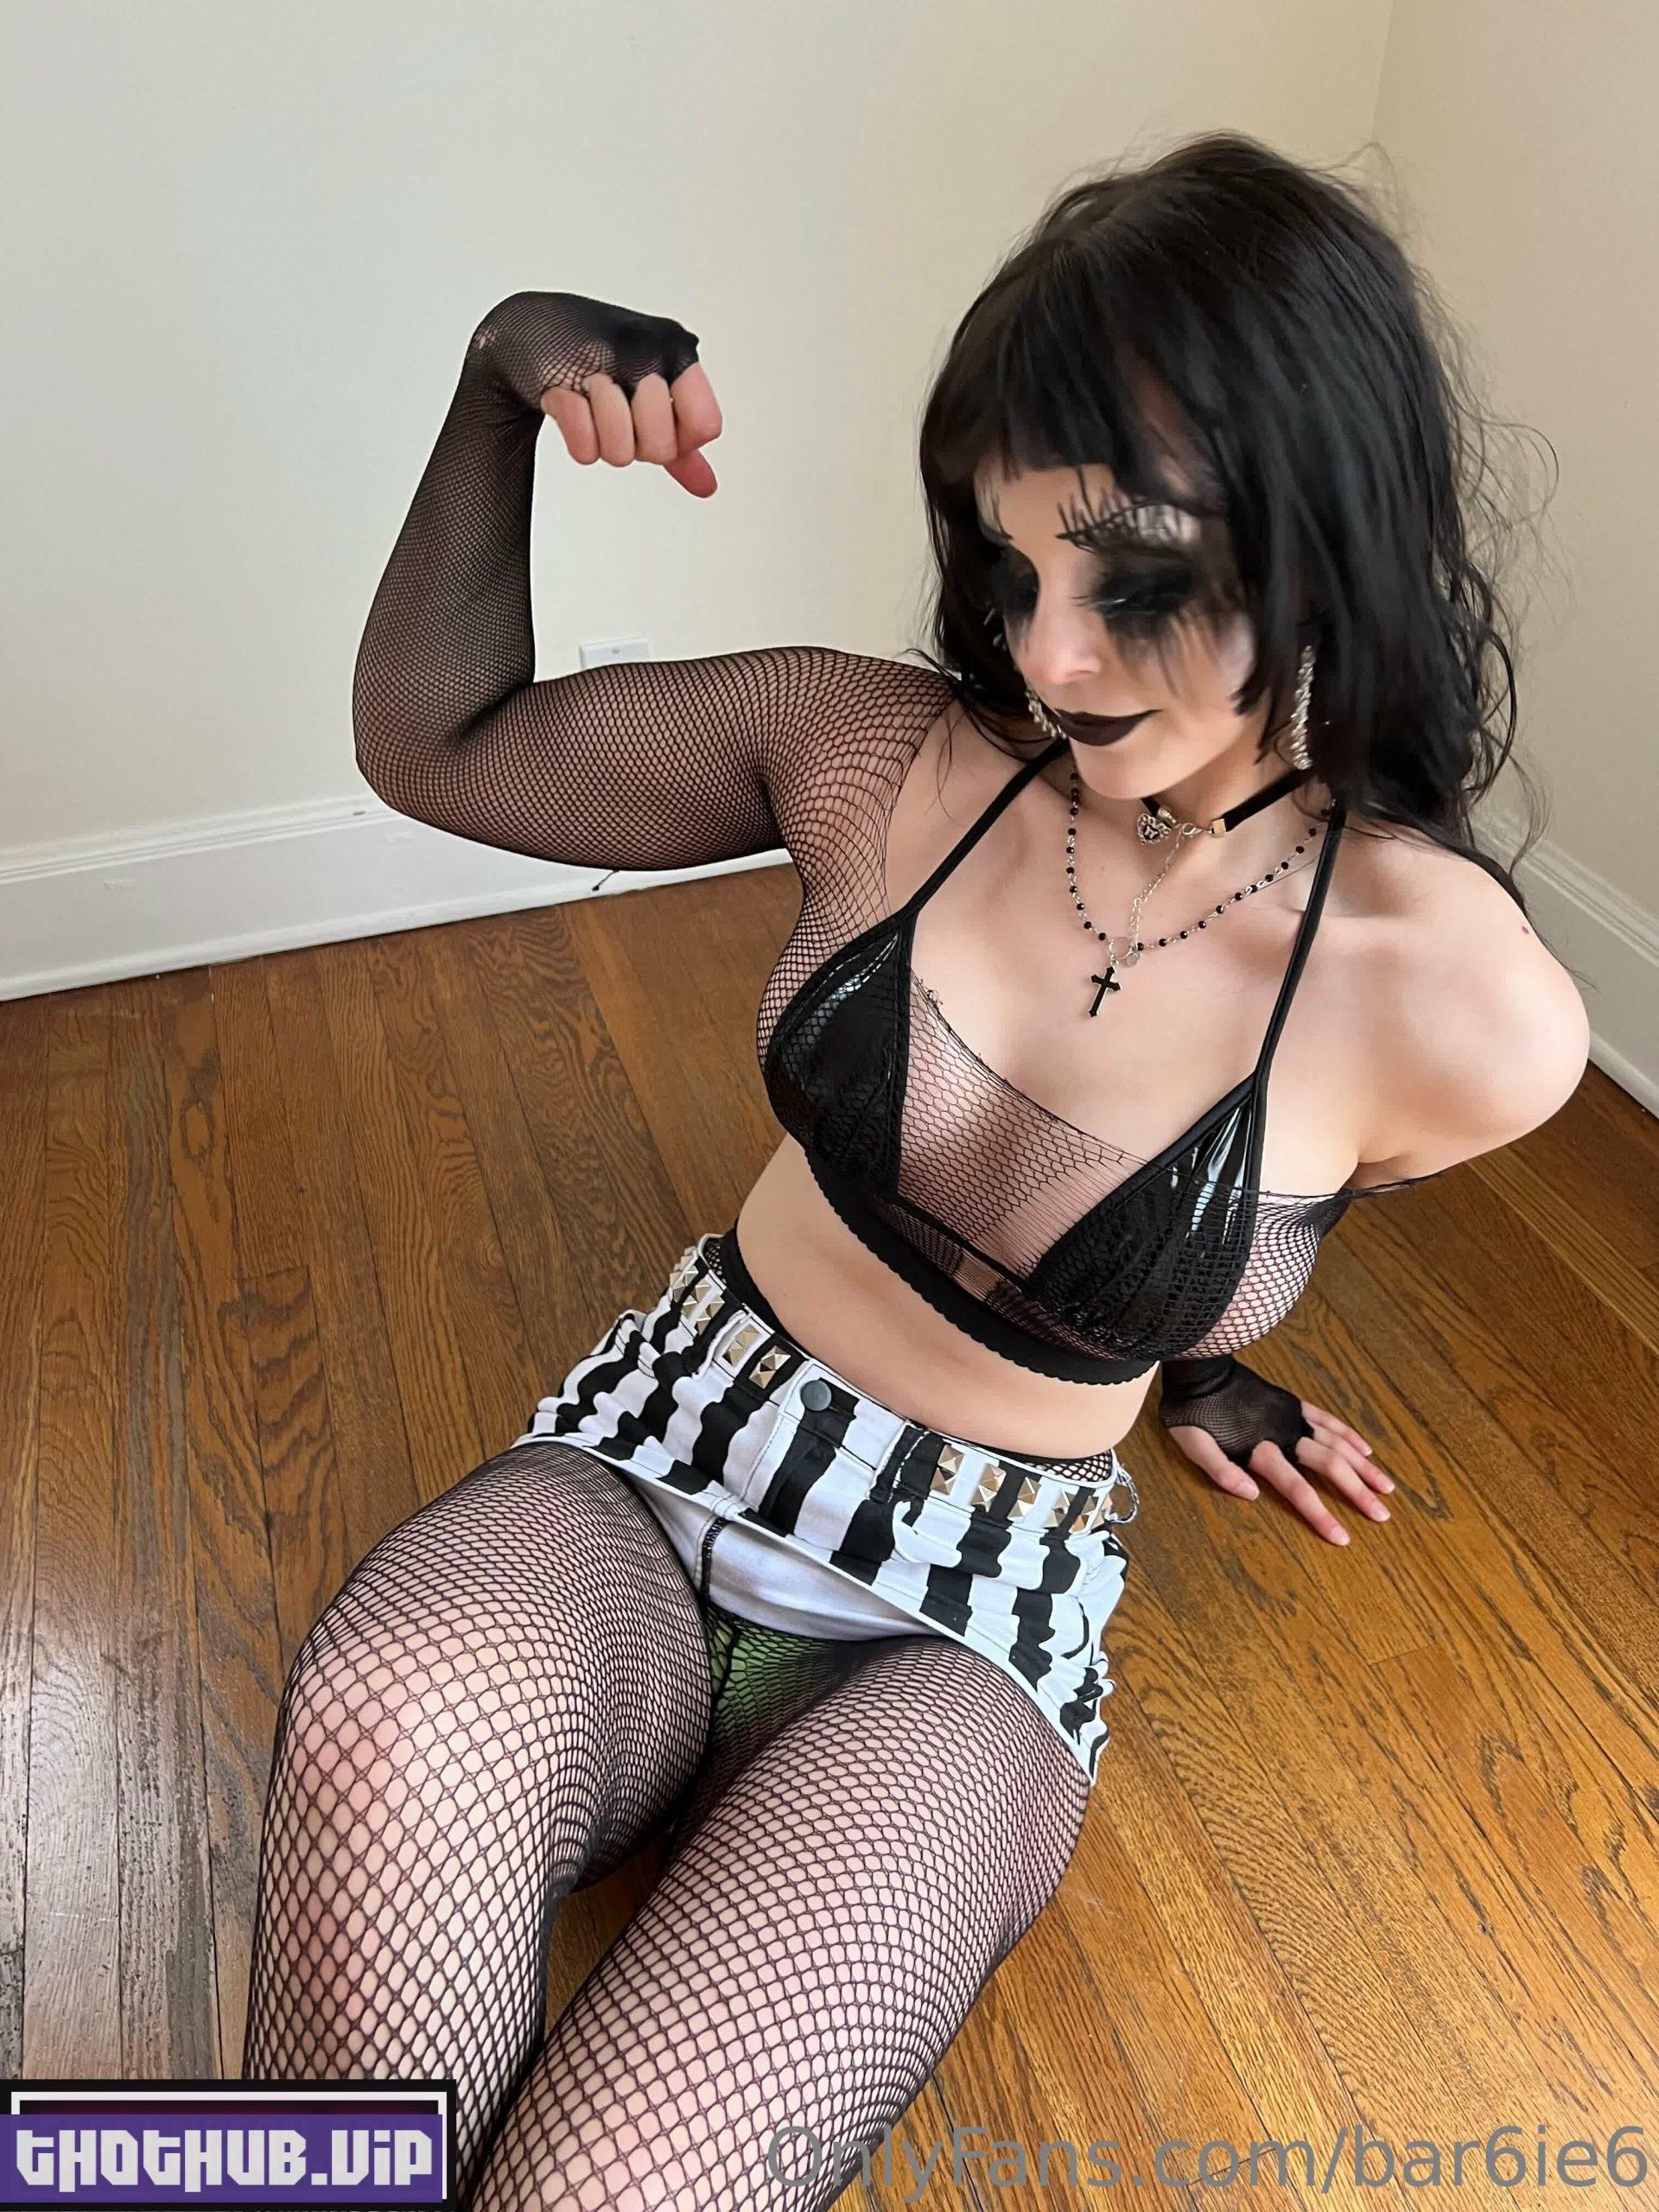 1699032531 818 Bar6ie6 %E2%80%93 Busty Goth Onlyfans Nudes